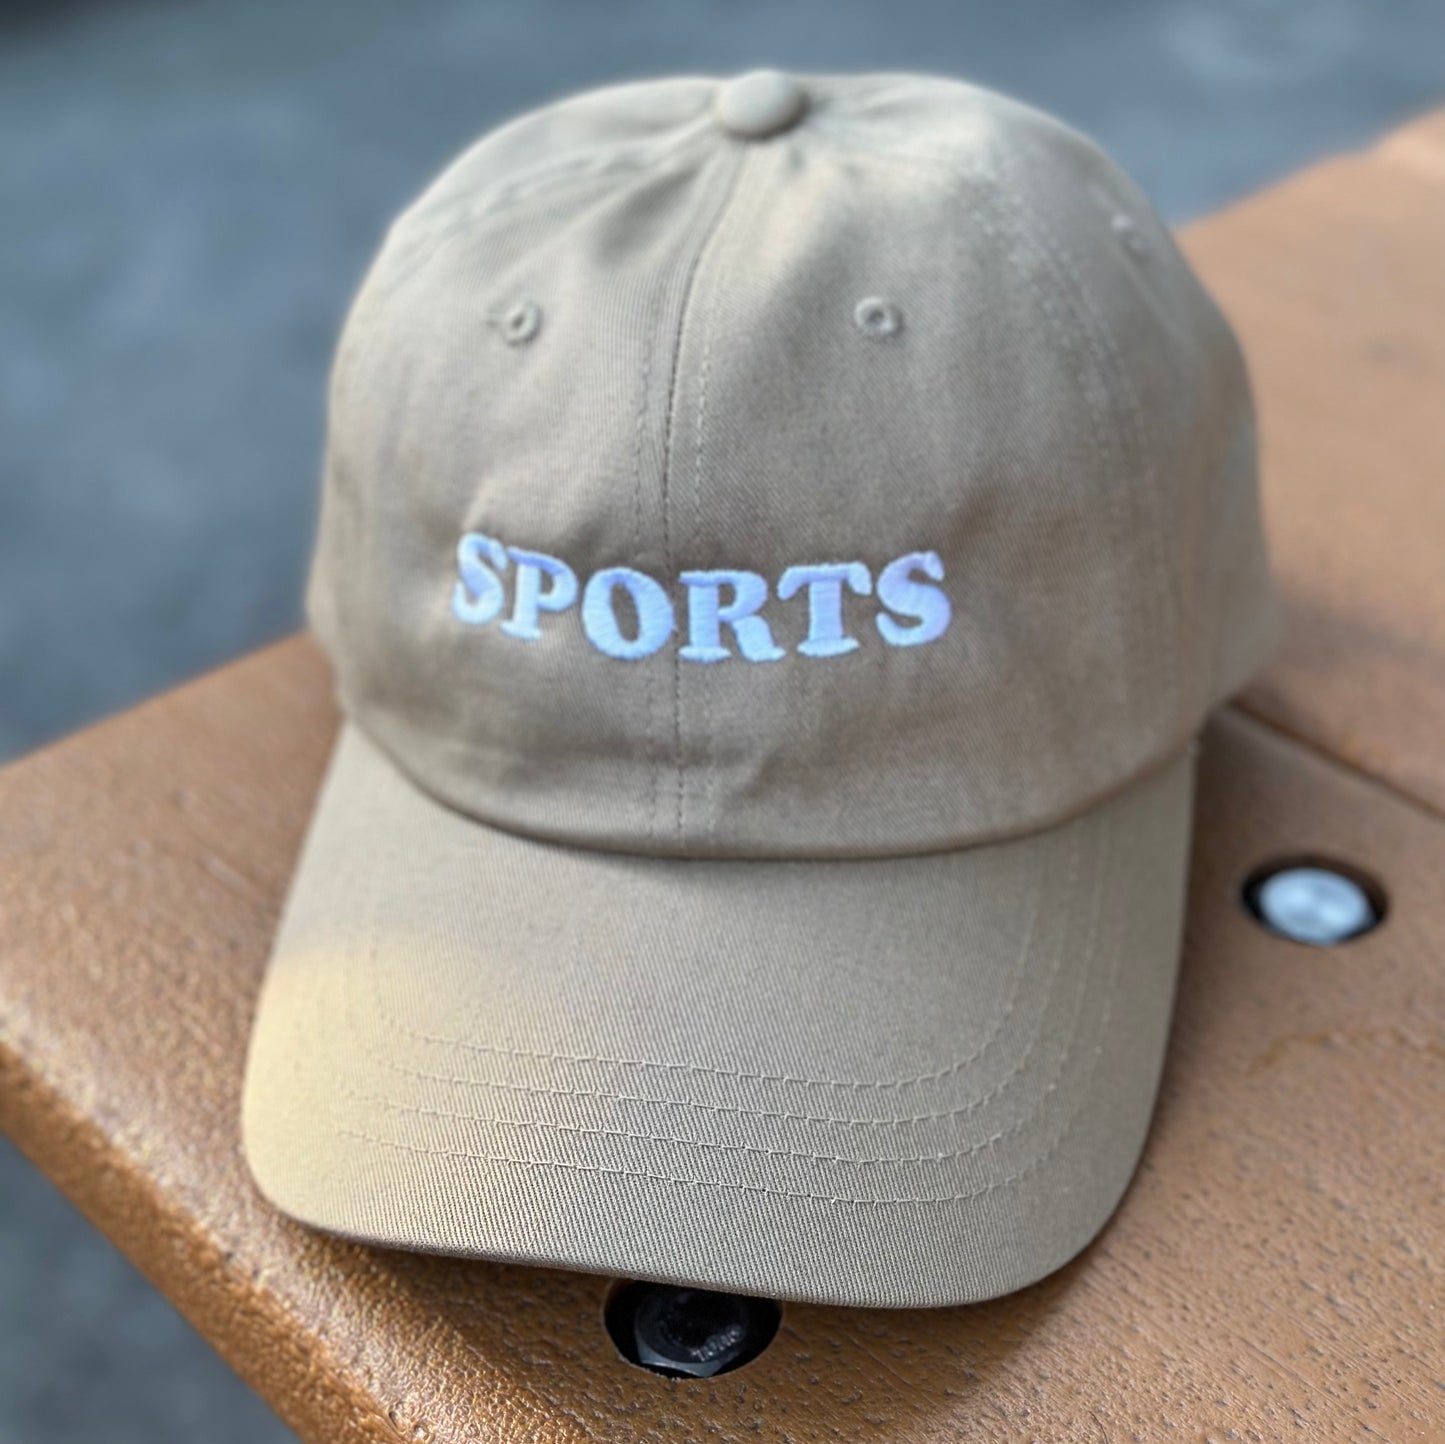 SPORTS dad hat in stone